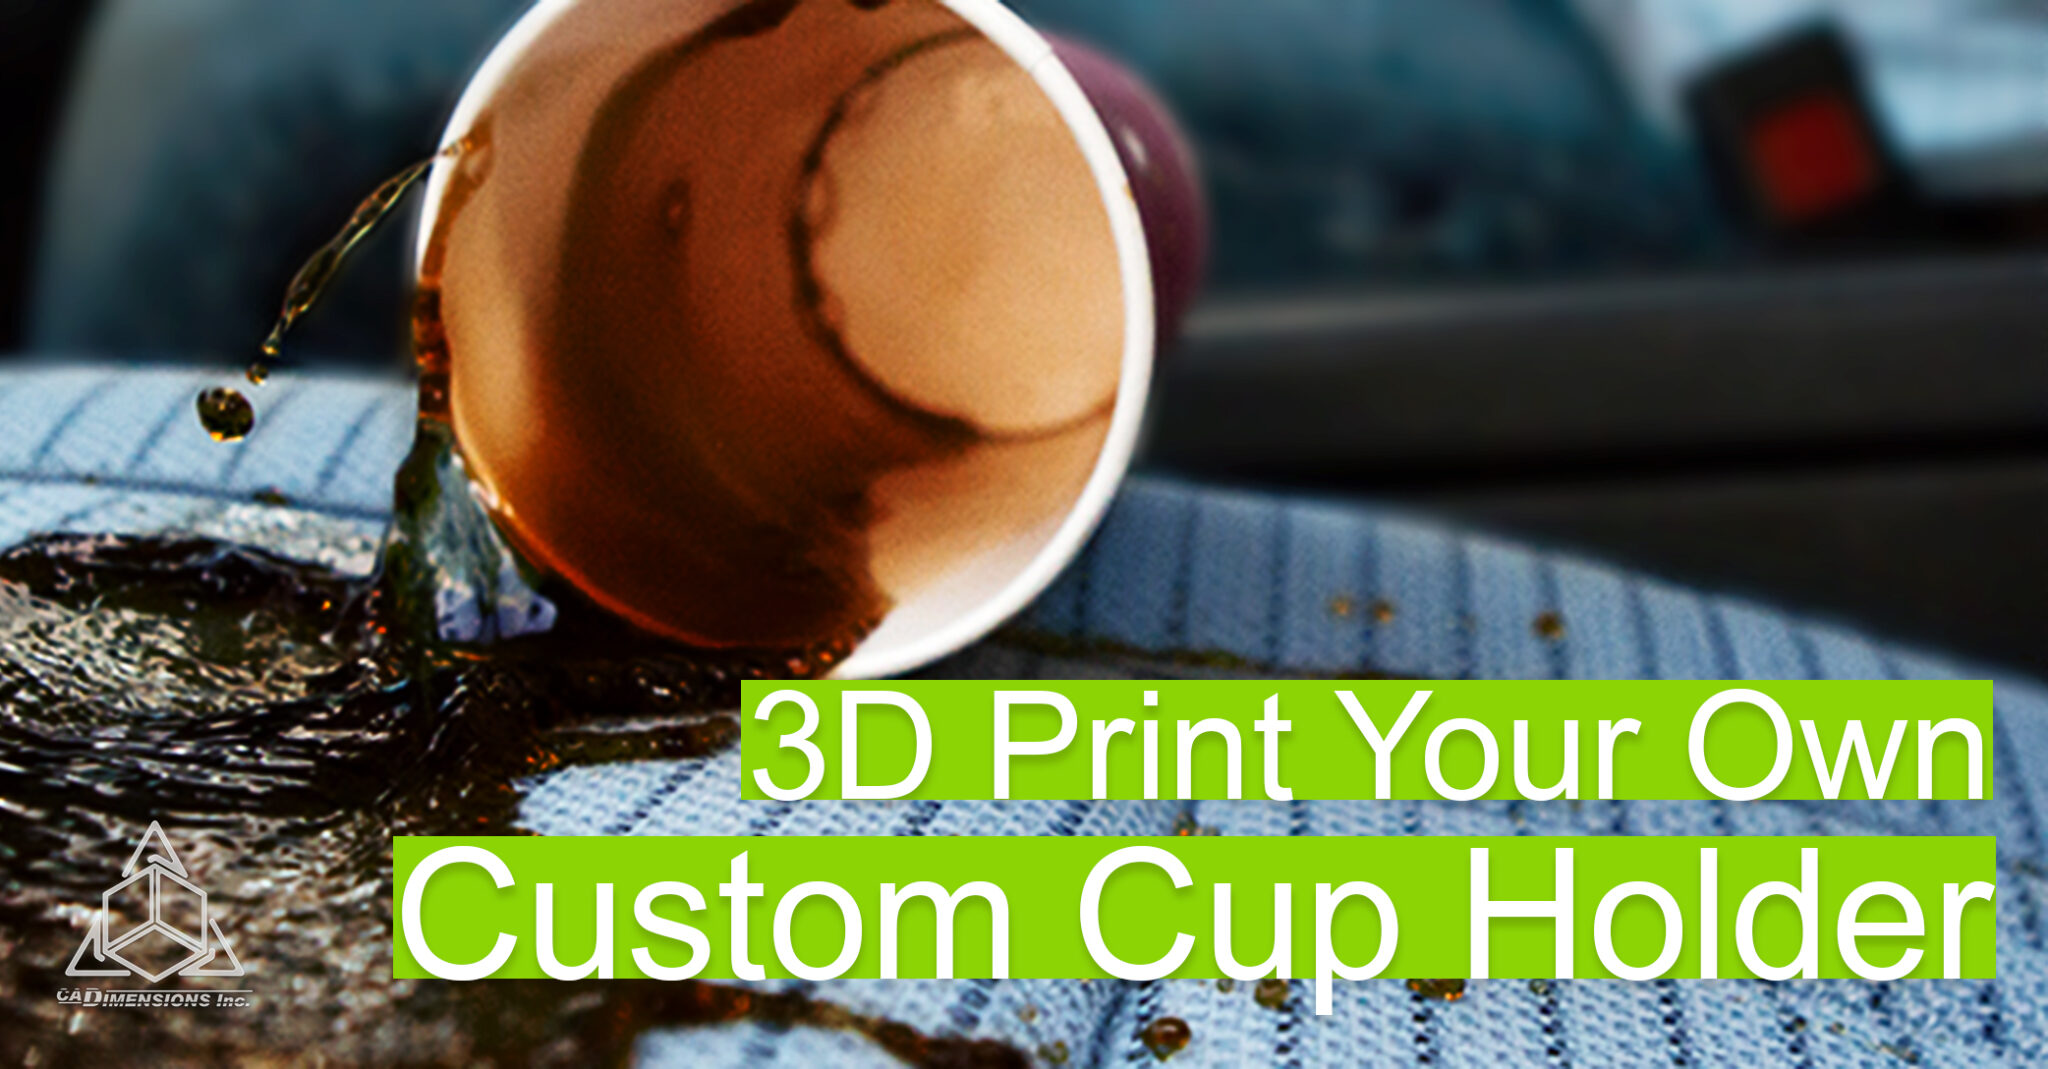 3D Print Your Own Custom Cup Holder